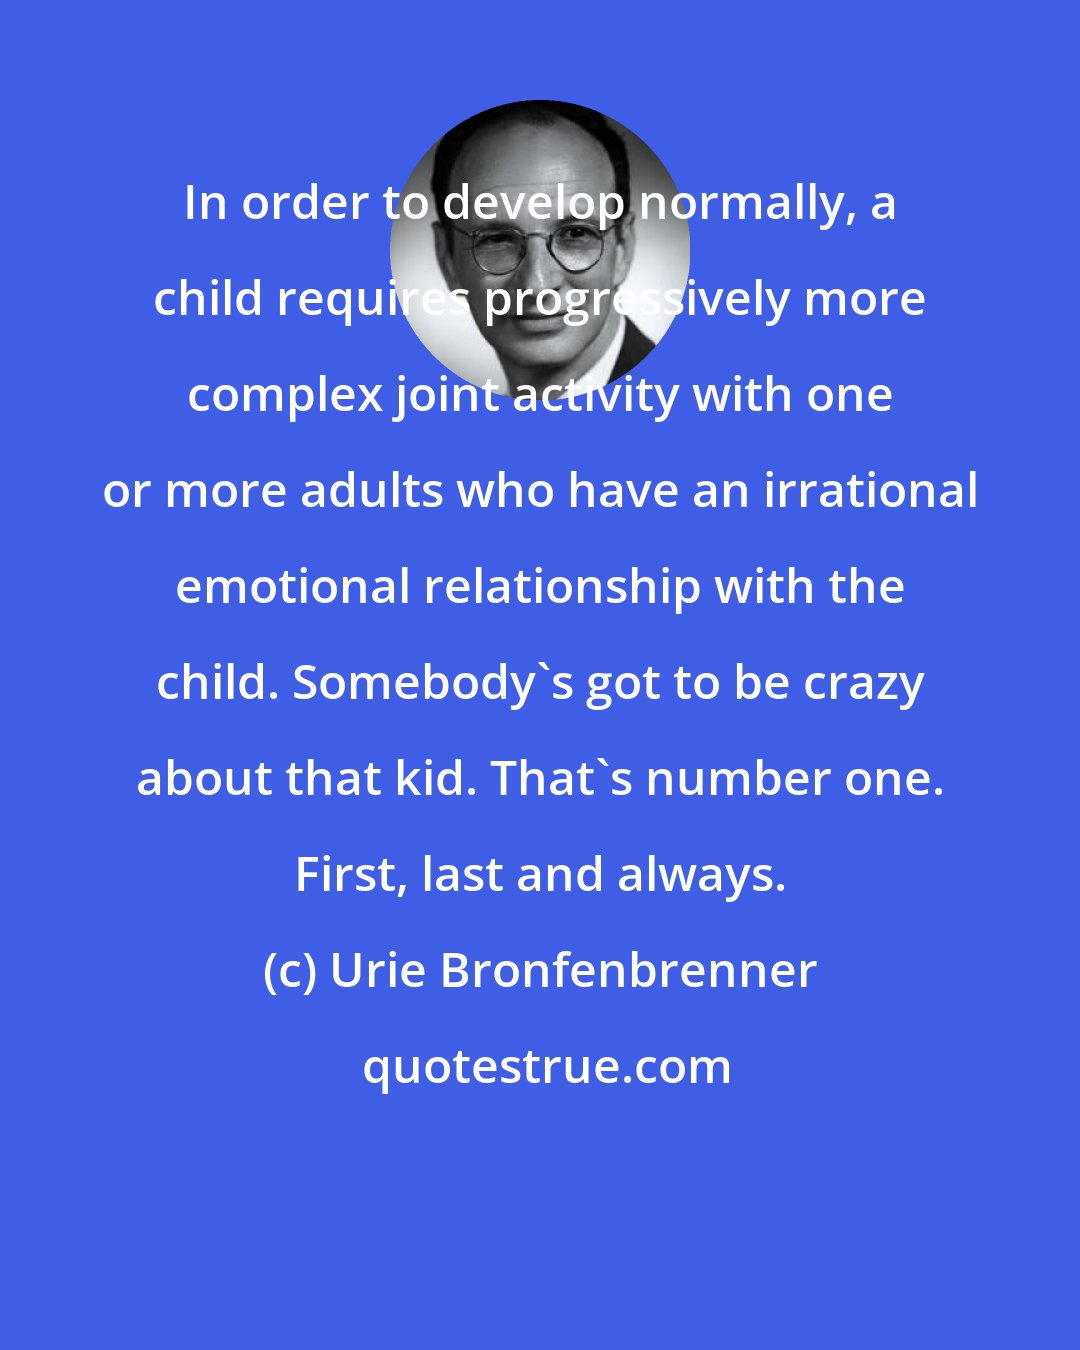 Urie Bronfenbrenner: In order to develop normally, a child requires progressively more complex joint activity with one or more adults who have an irrational emotional relationship with the child. Somebody's got to be crazy about that kid. That's number one. First, last and always.